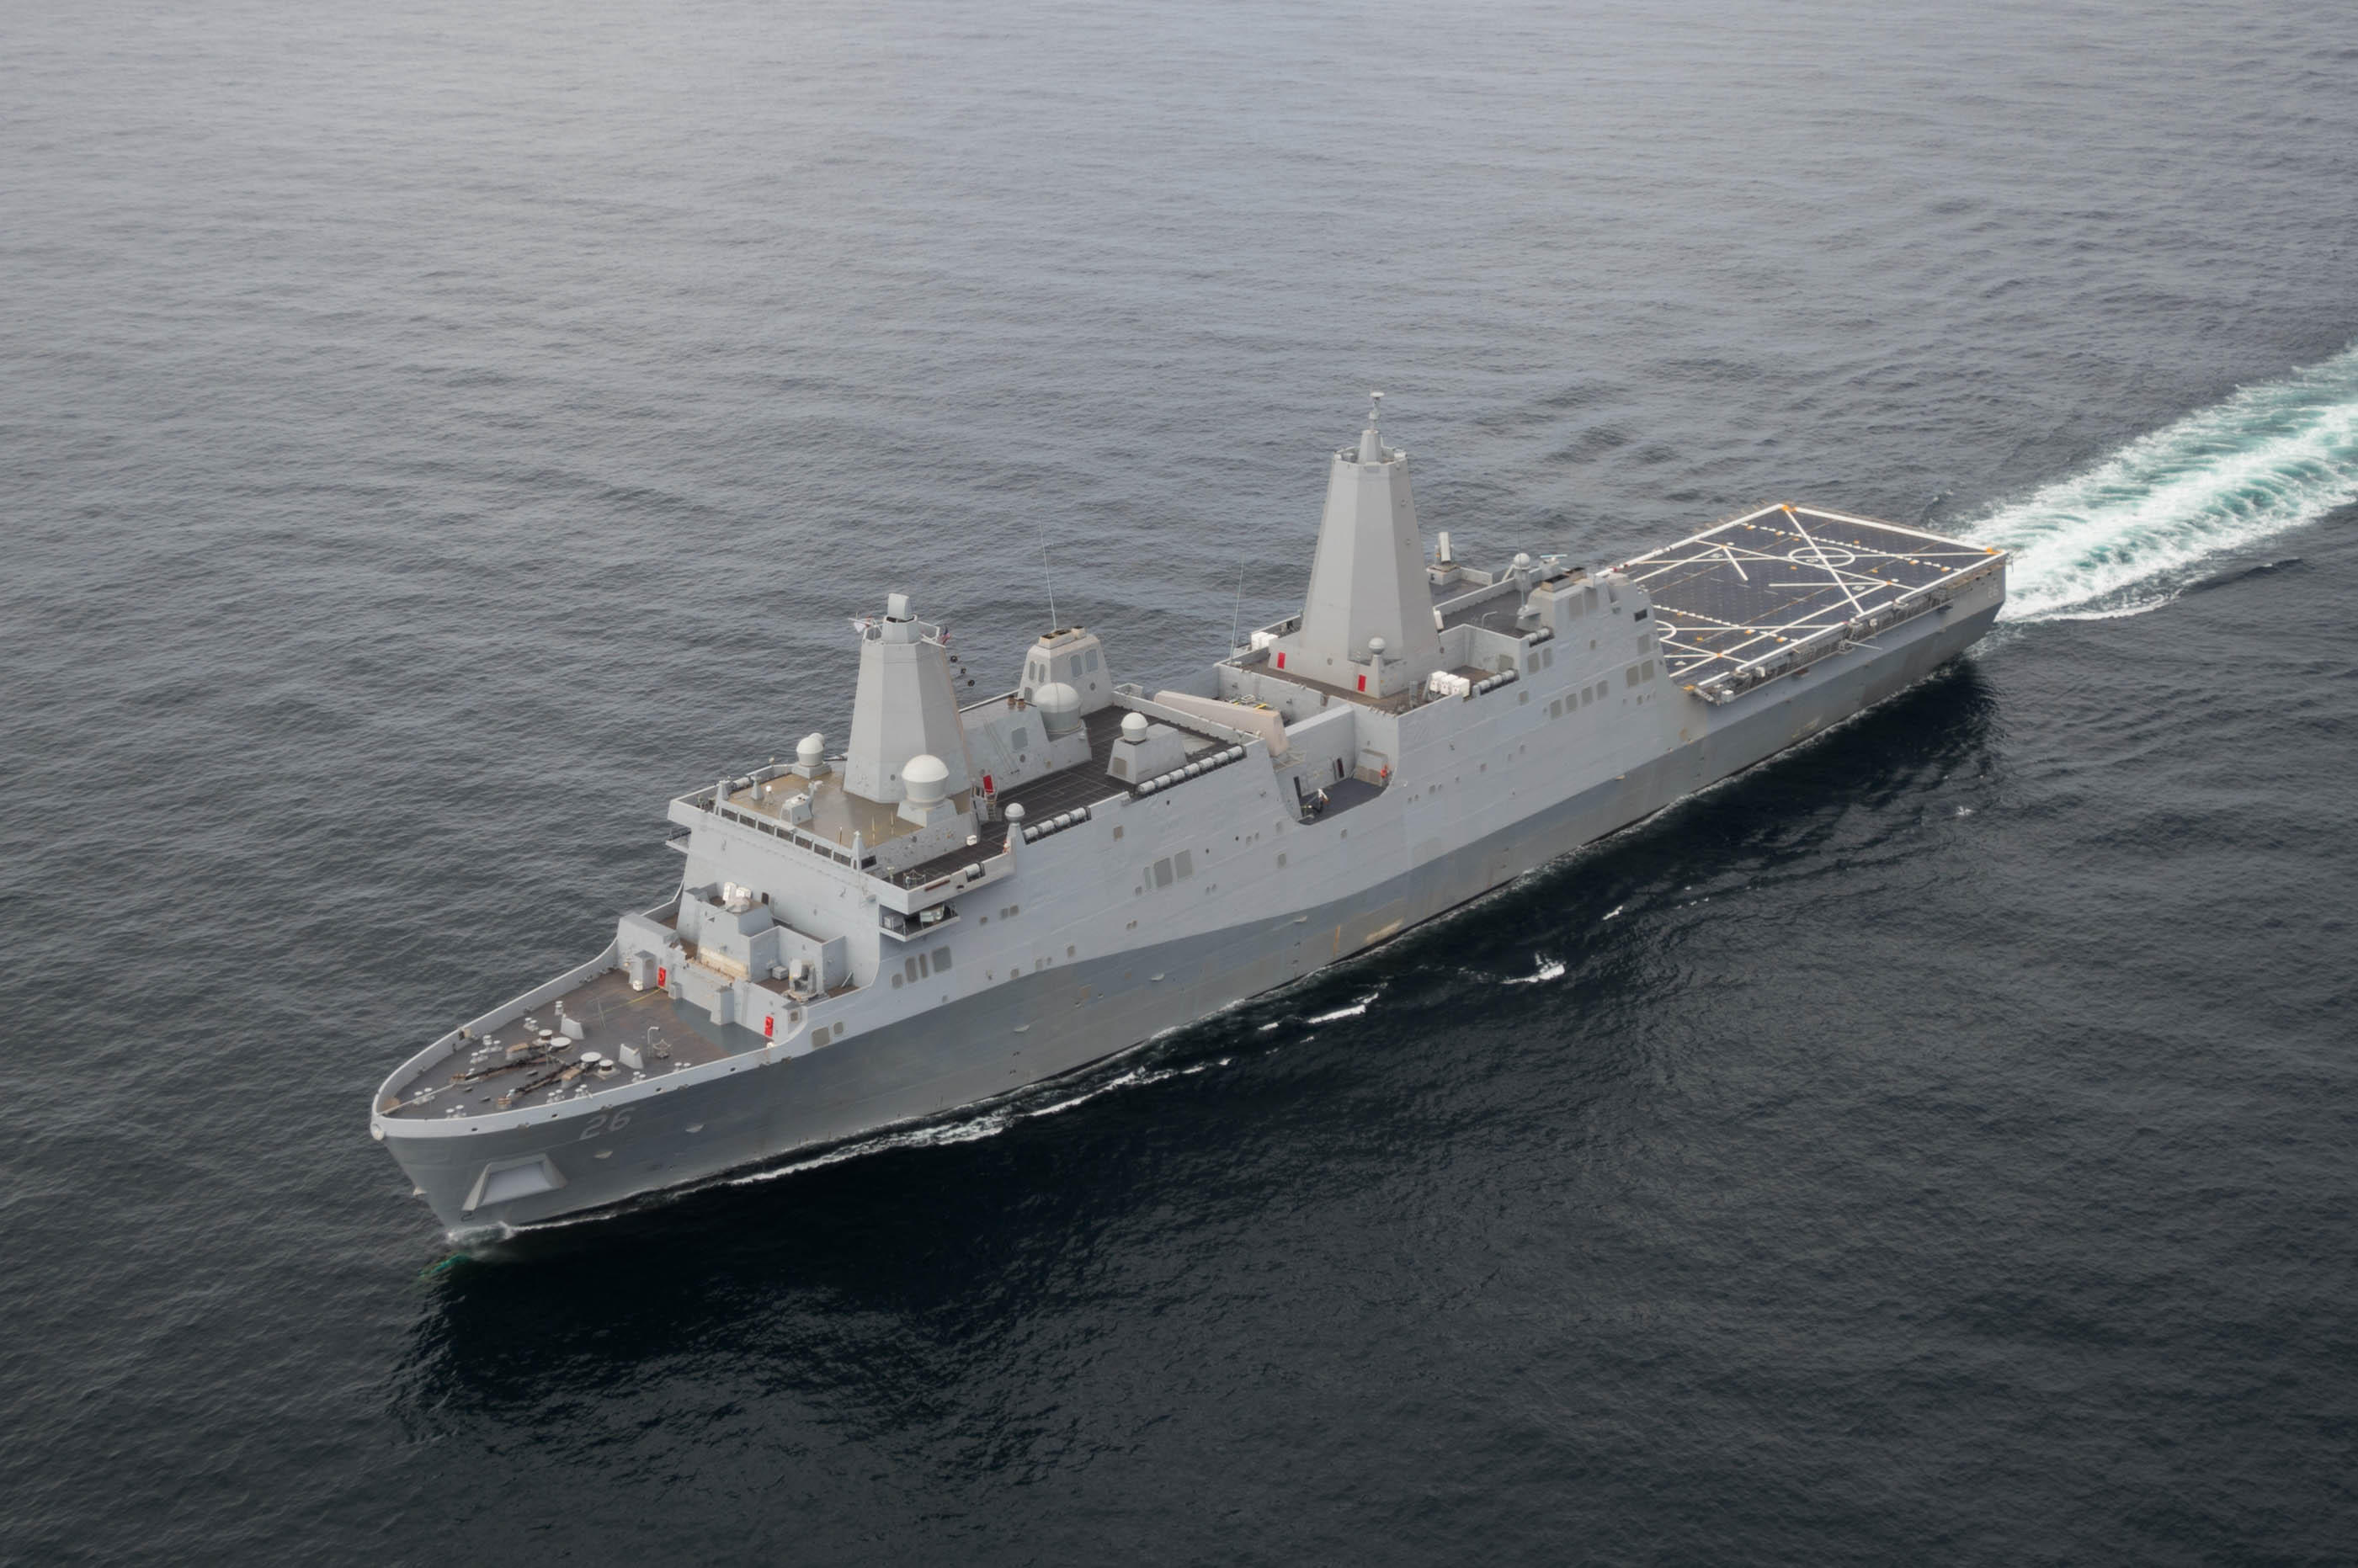 Ingalls Shipbuilding’s 10th amphibious transport dock, John P. Murtha (LPD 26), sails the Gulf of Mexico for Builder’s Trial in March 2016. Huntington Ingalls Industries photo.